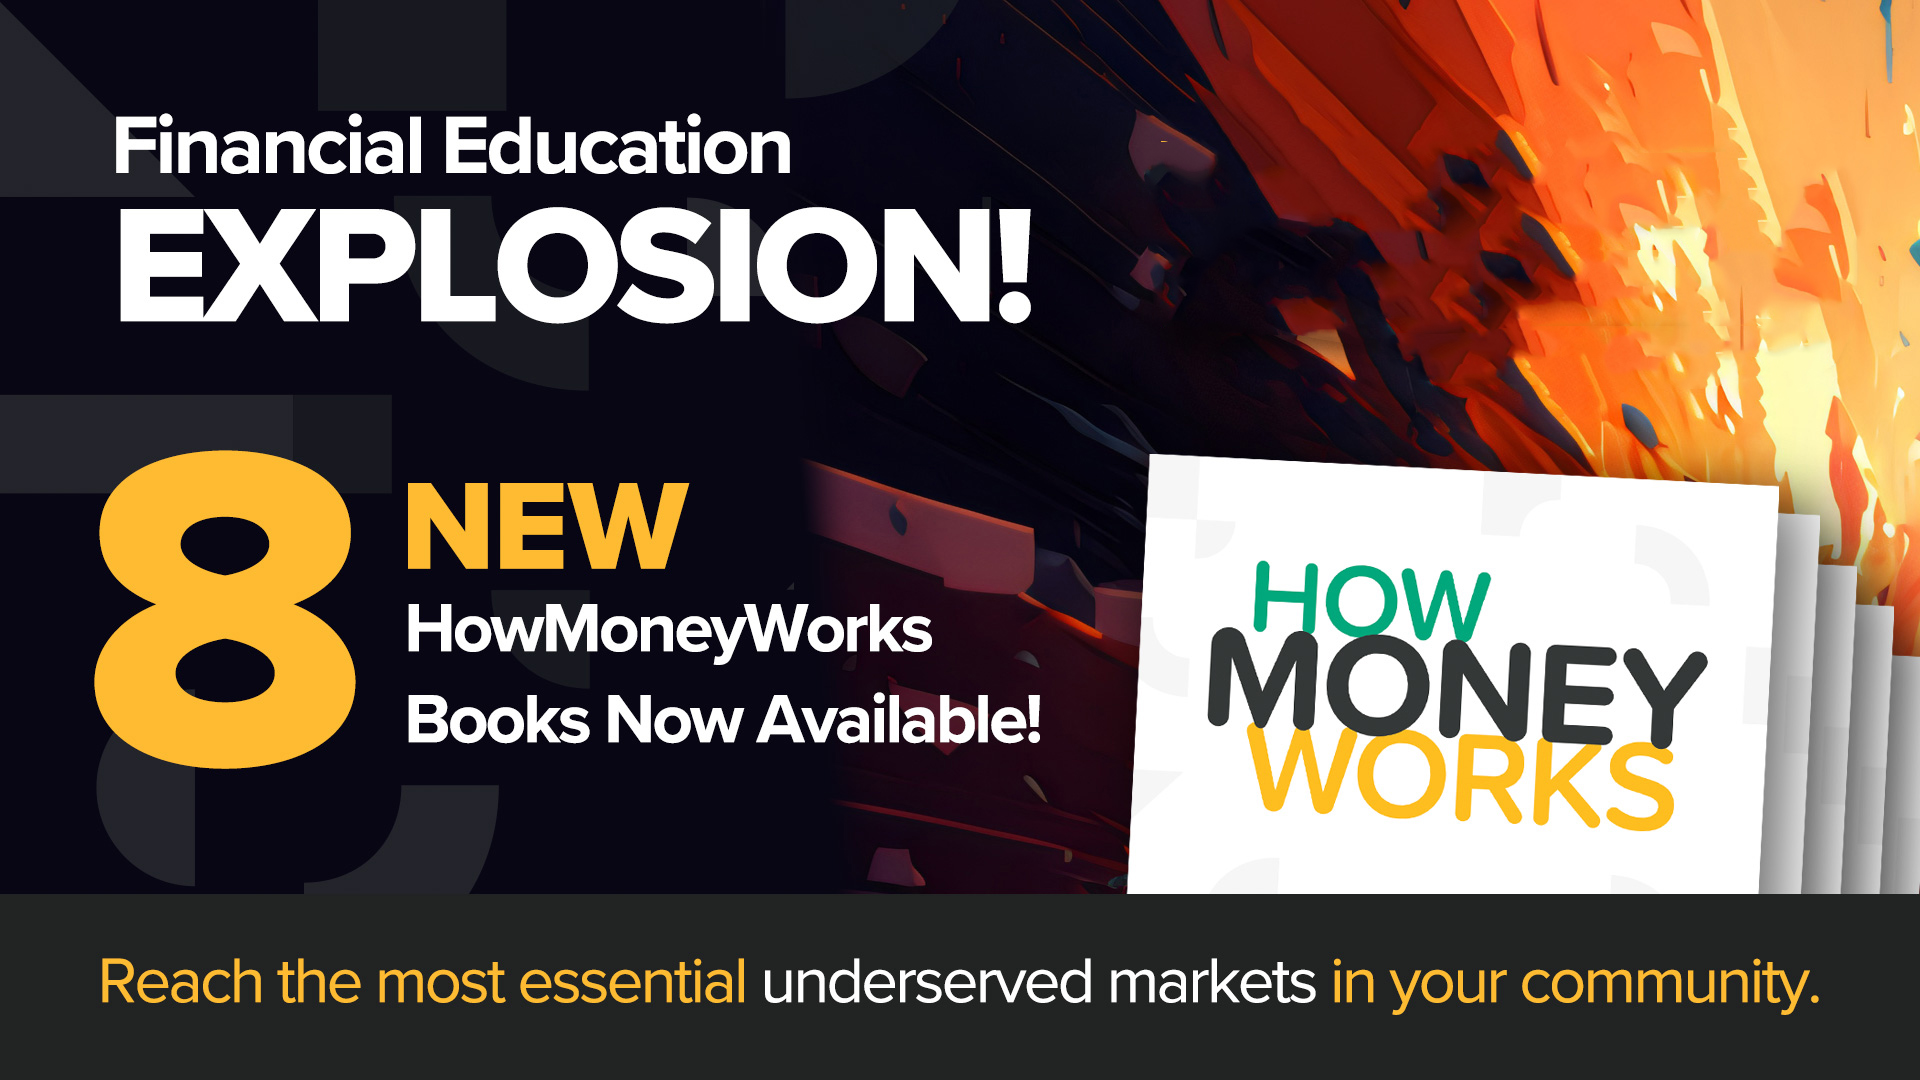 8 New HowMoneyWorks Books—Today We Unveil a Diverse New Lineup of Financial Literacy Books